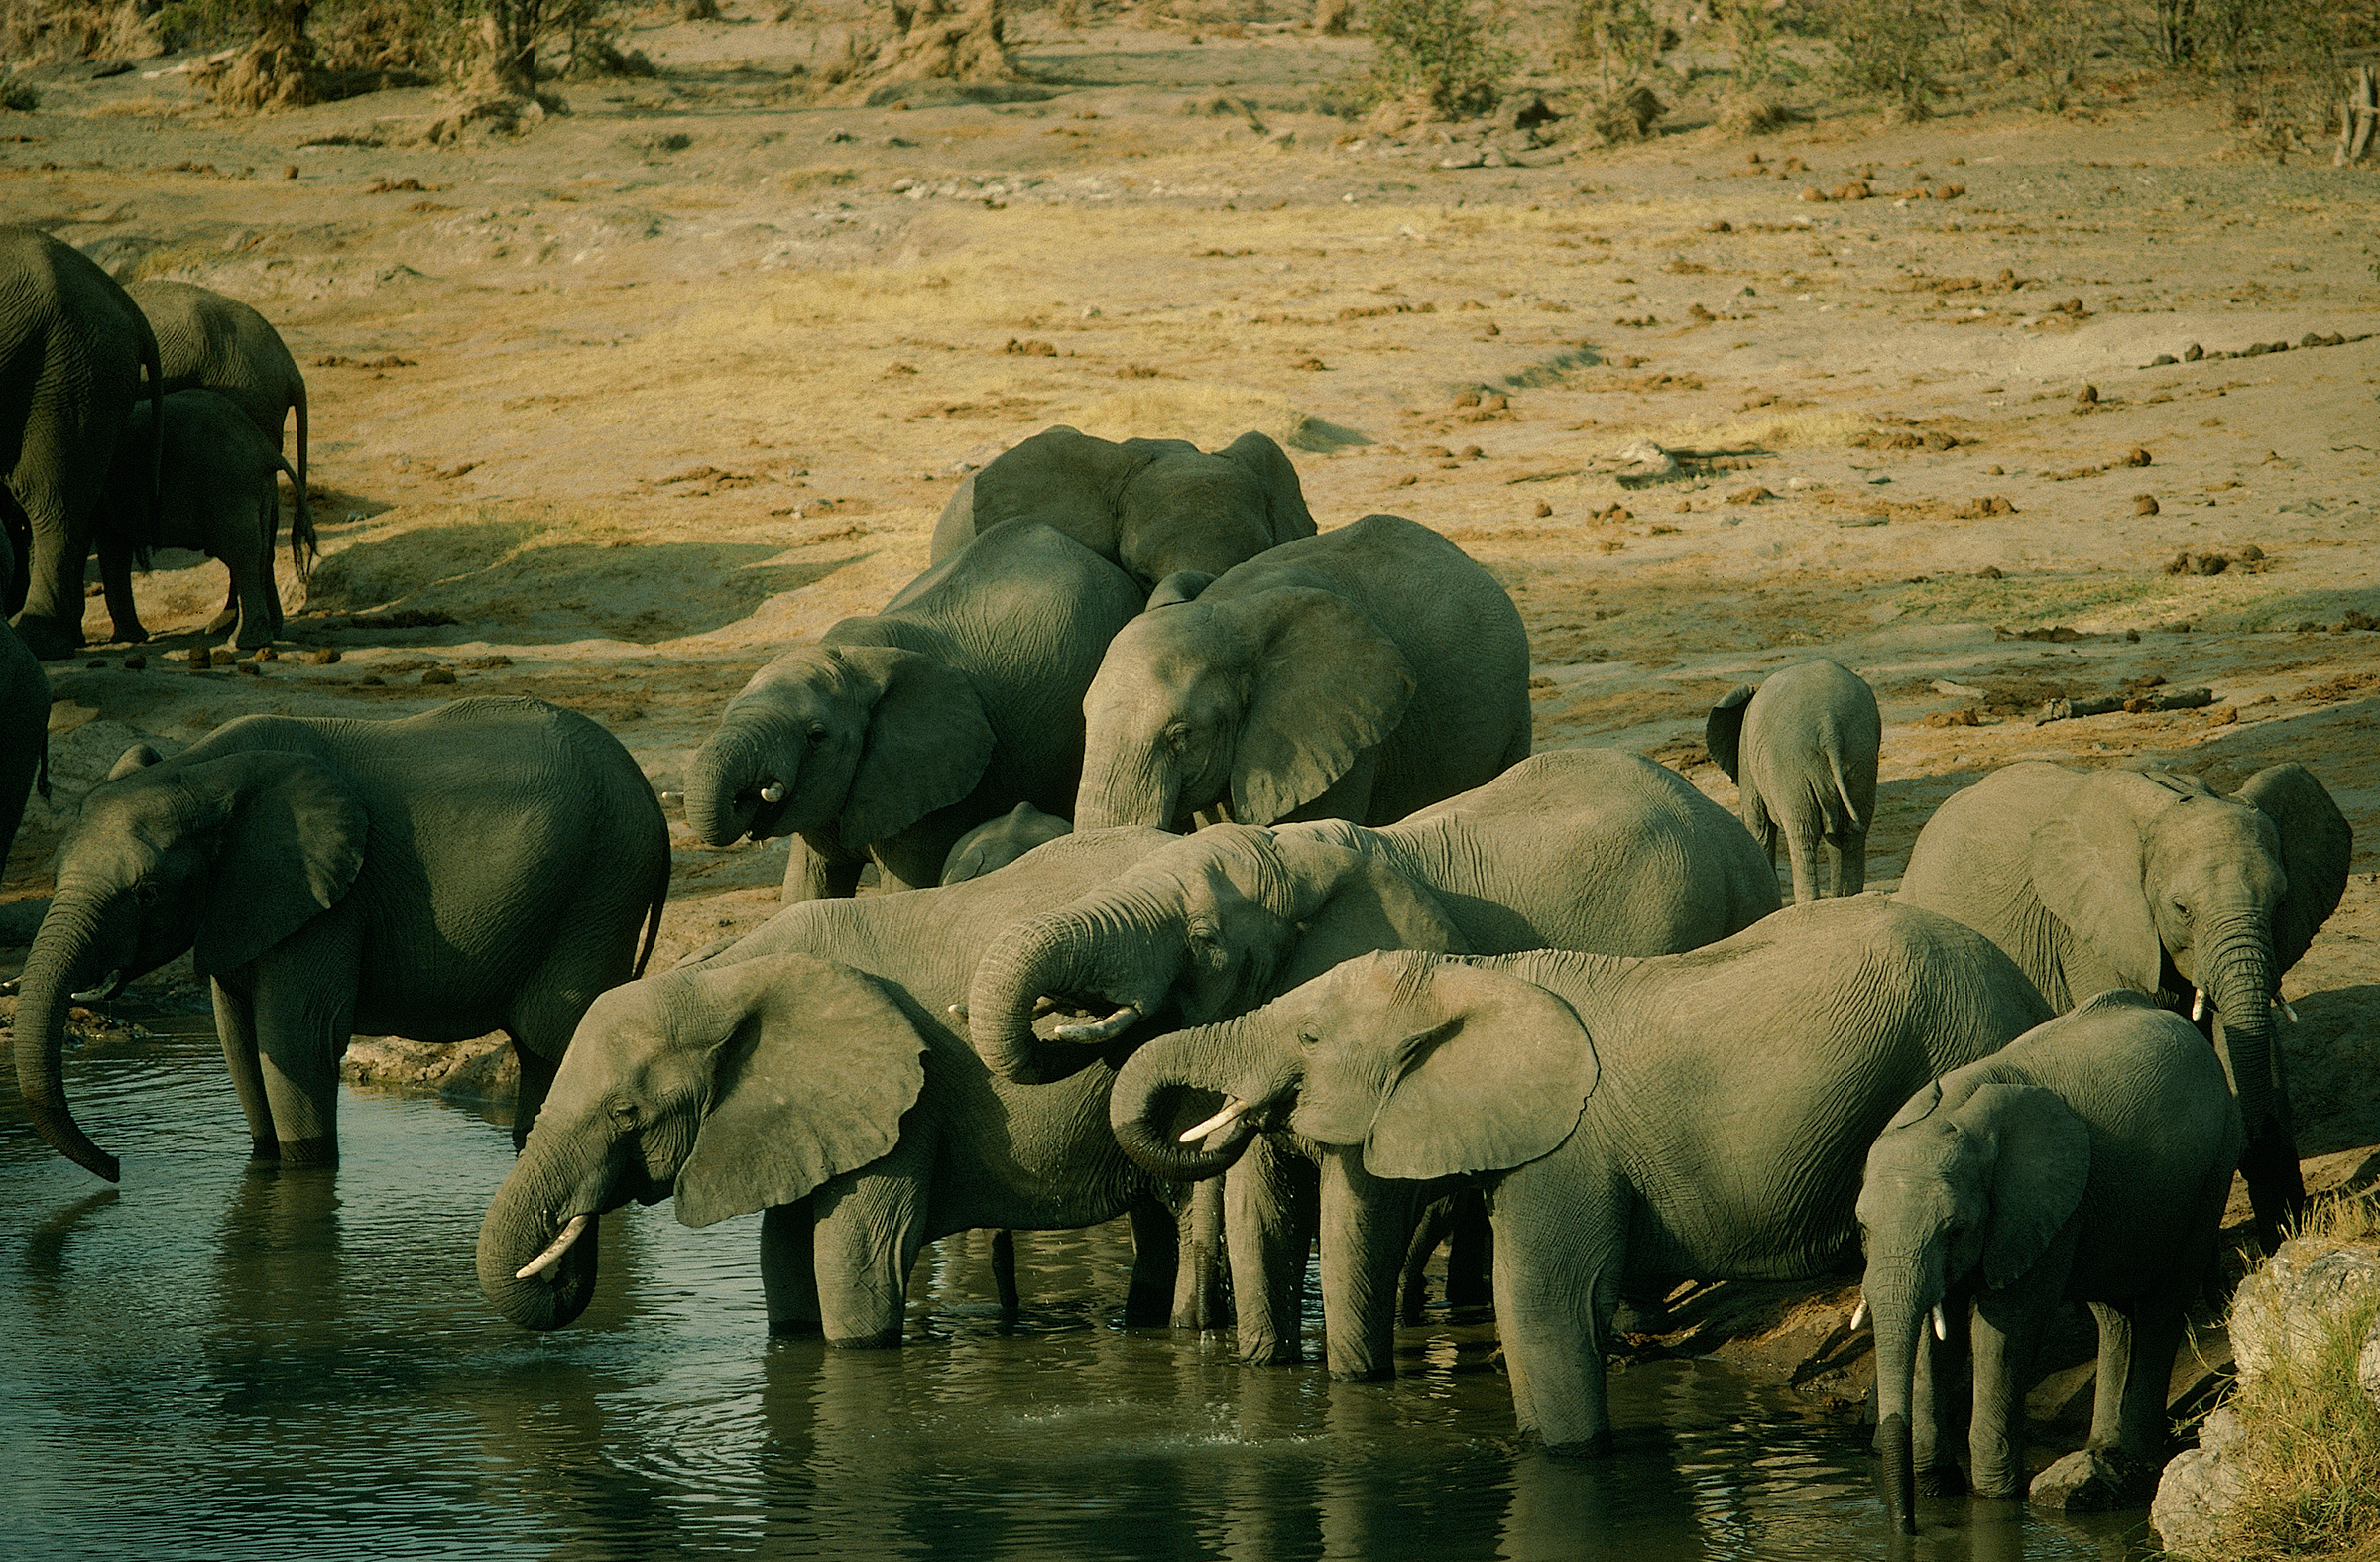 Elephants at a water hole in Hwange National Park. (Steve Thomas—Panos Pictures/Redux)